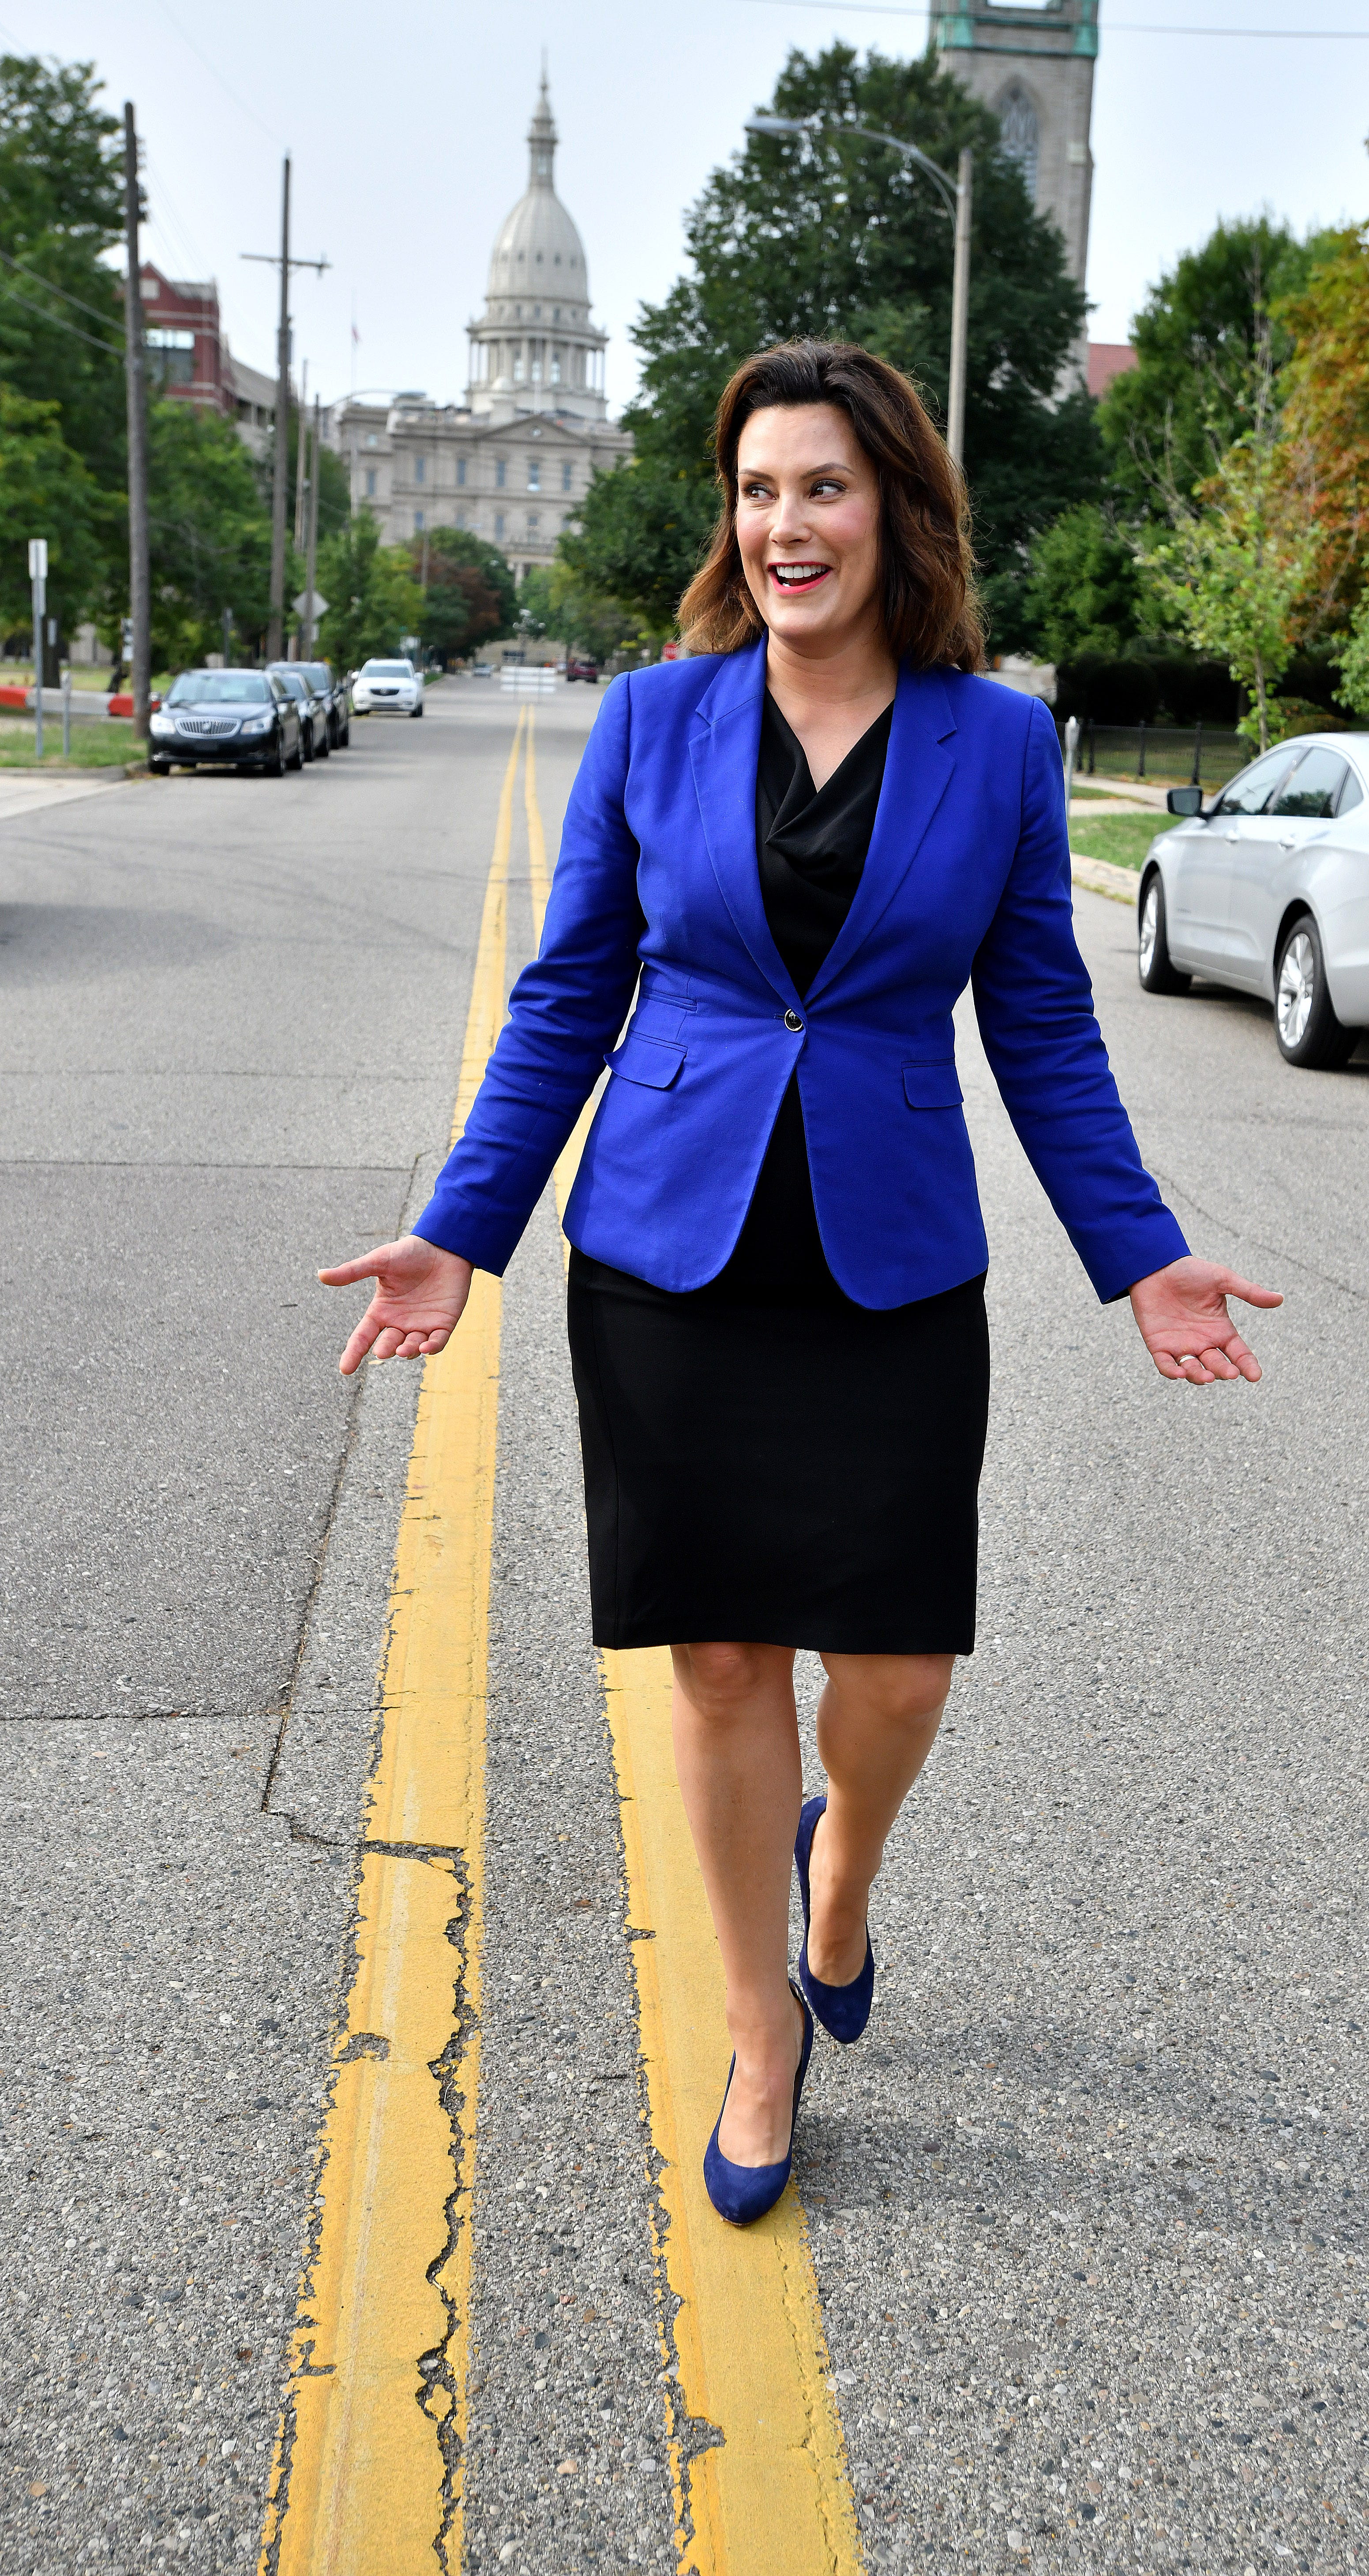 One of the photographers present asked Democratic candidate for governor, Gretchen Whitmer, to walk the line down the center of the road, during an event in downtown Lansing on Monday, Aug 20, 2018.